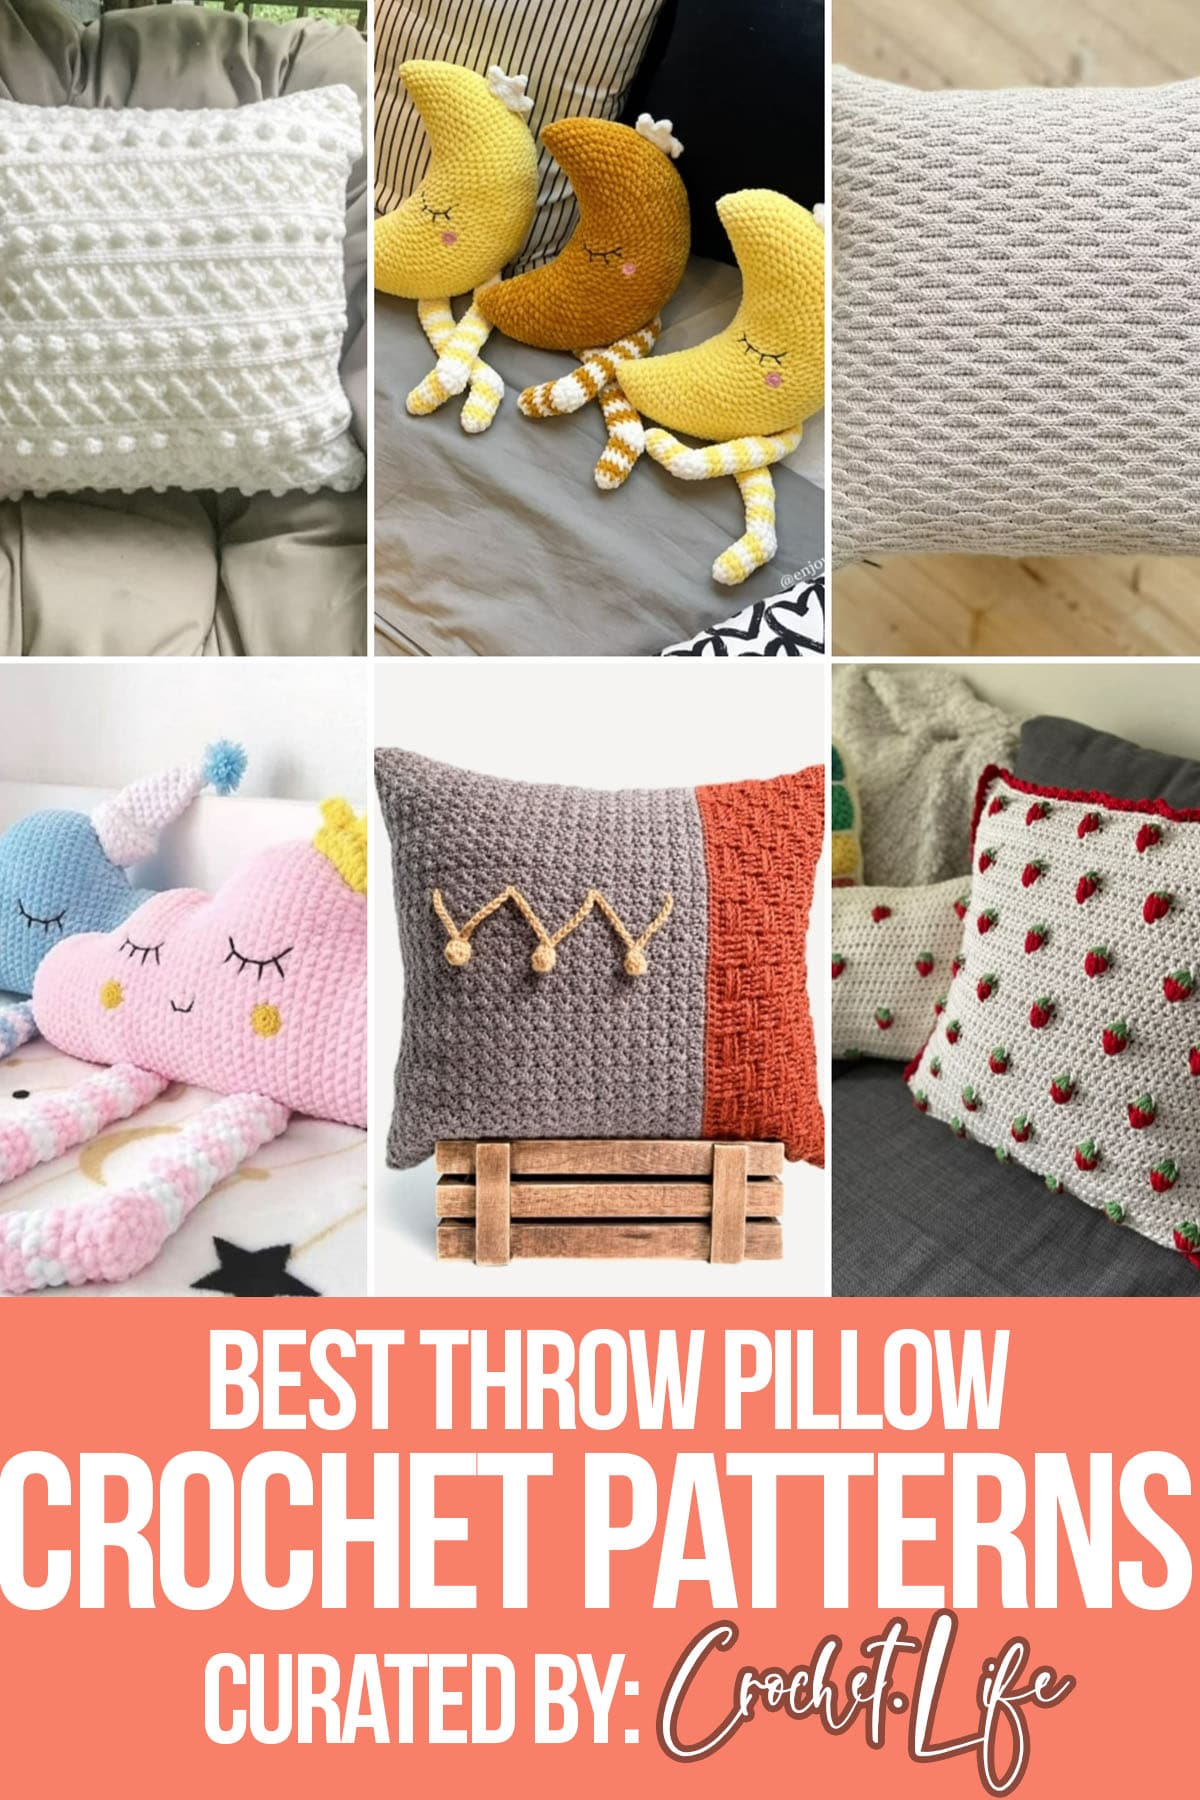 photo collage of crochet patterns for throw pillows with text which reads best throw pillow crochet patterns curated by crochet.life